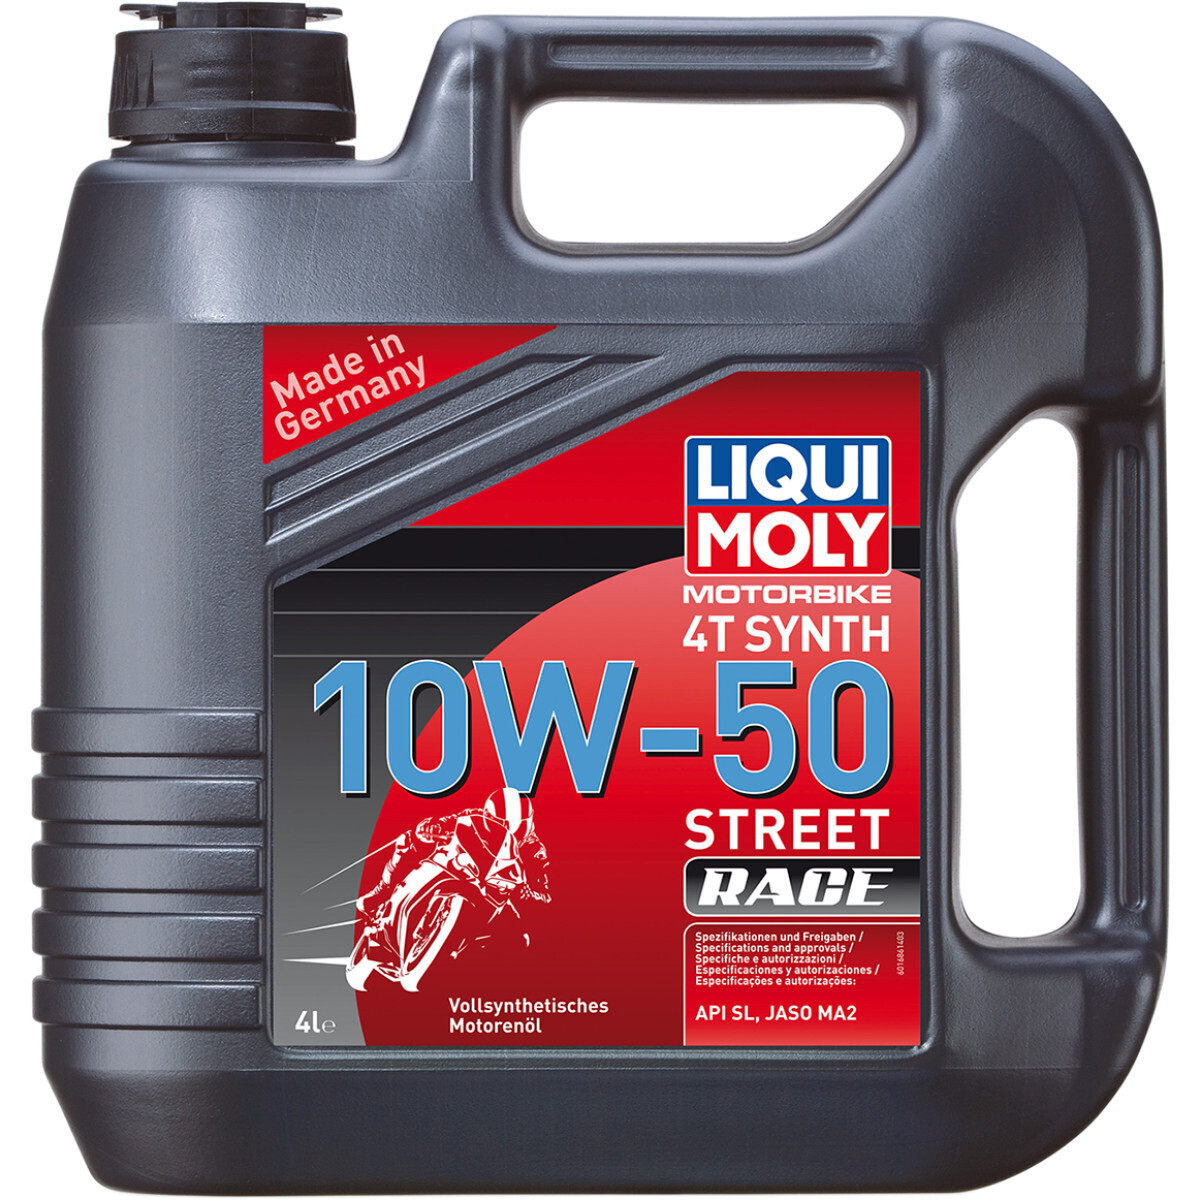 LIQUI MOLY
ENGINE OIL MOTORBIKE 4T 10W50 FULLY SYNTHETIC 4 LITER